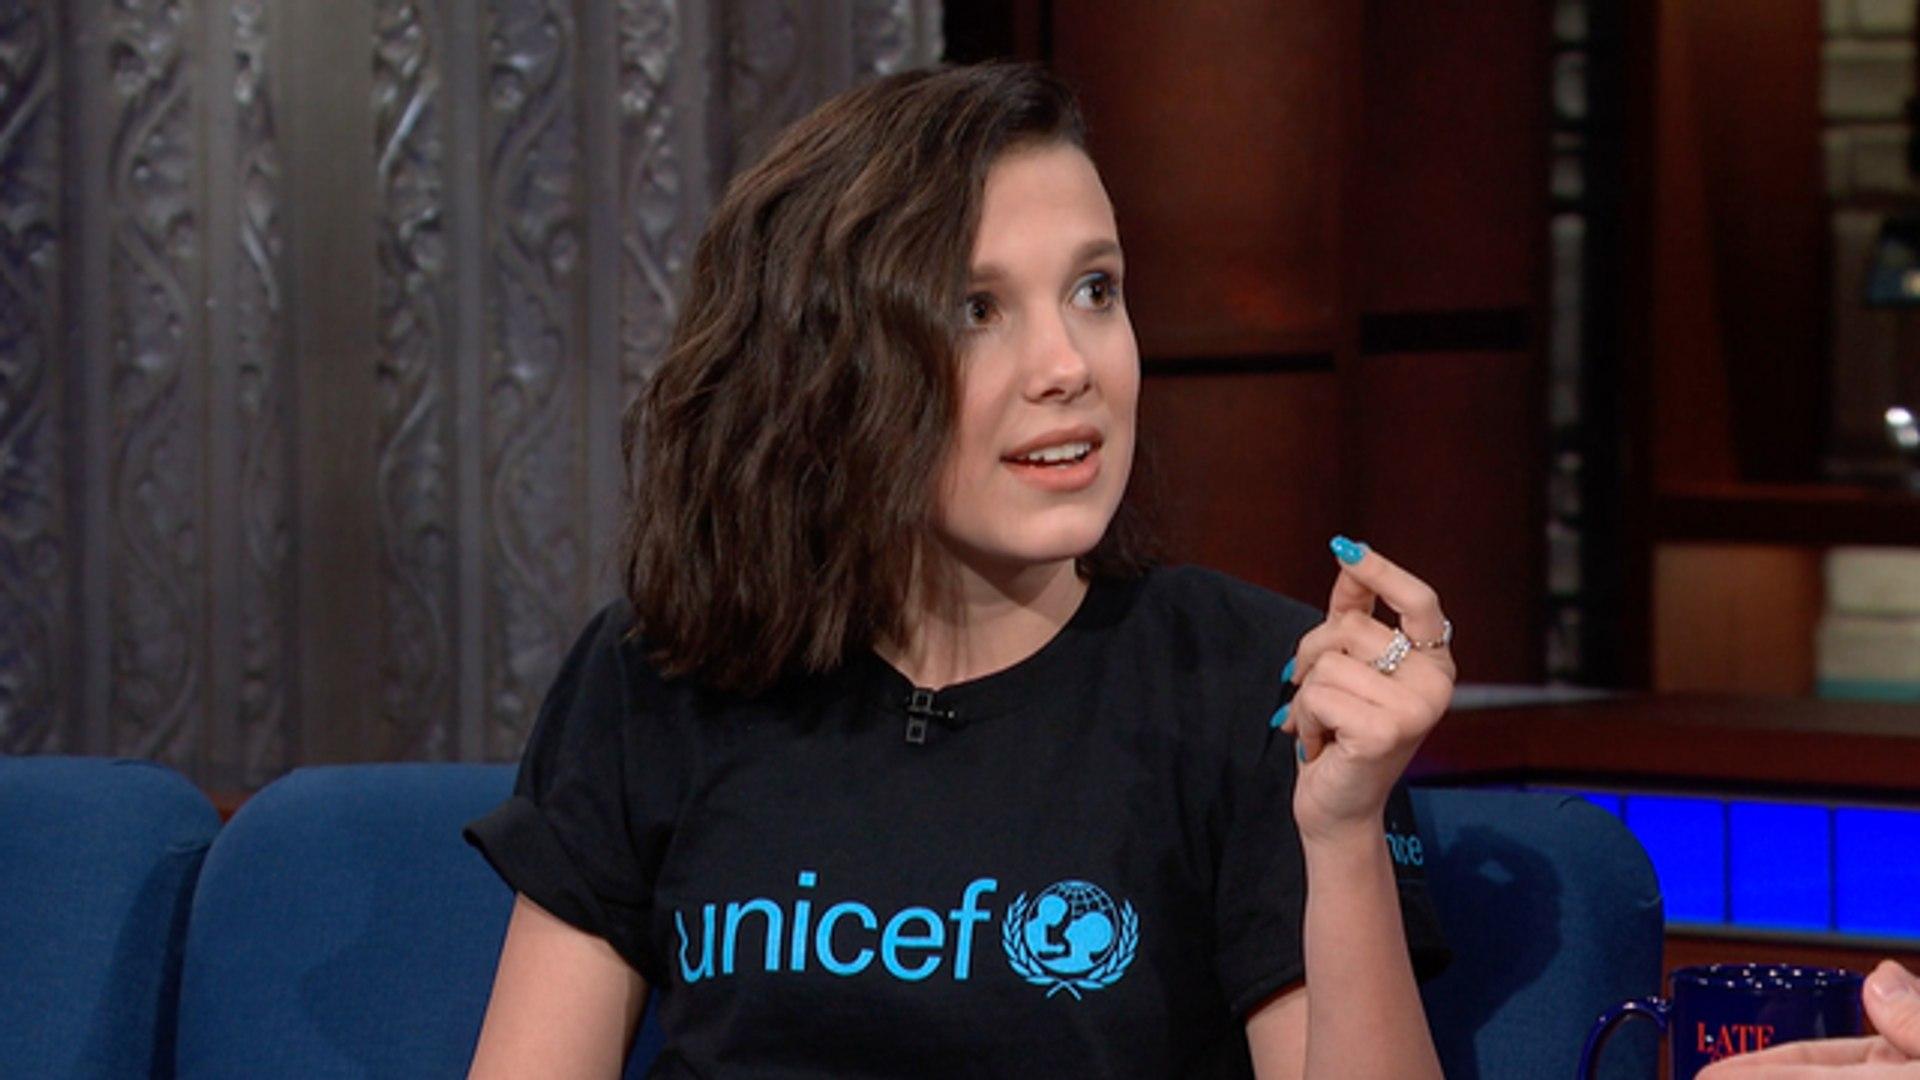 Millie Bobby Brown Paints Stephen's Nails For UNICEF